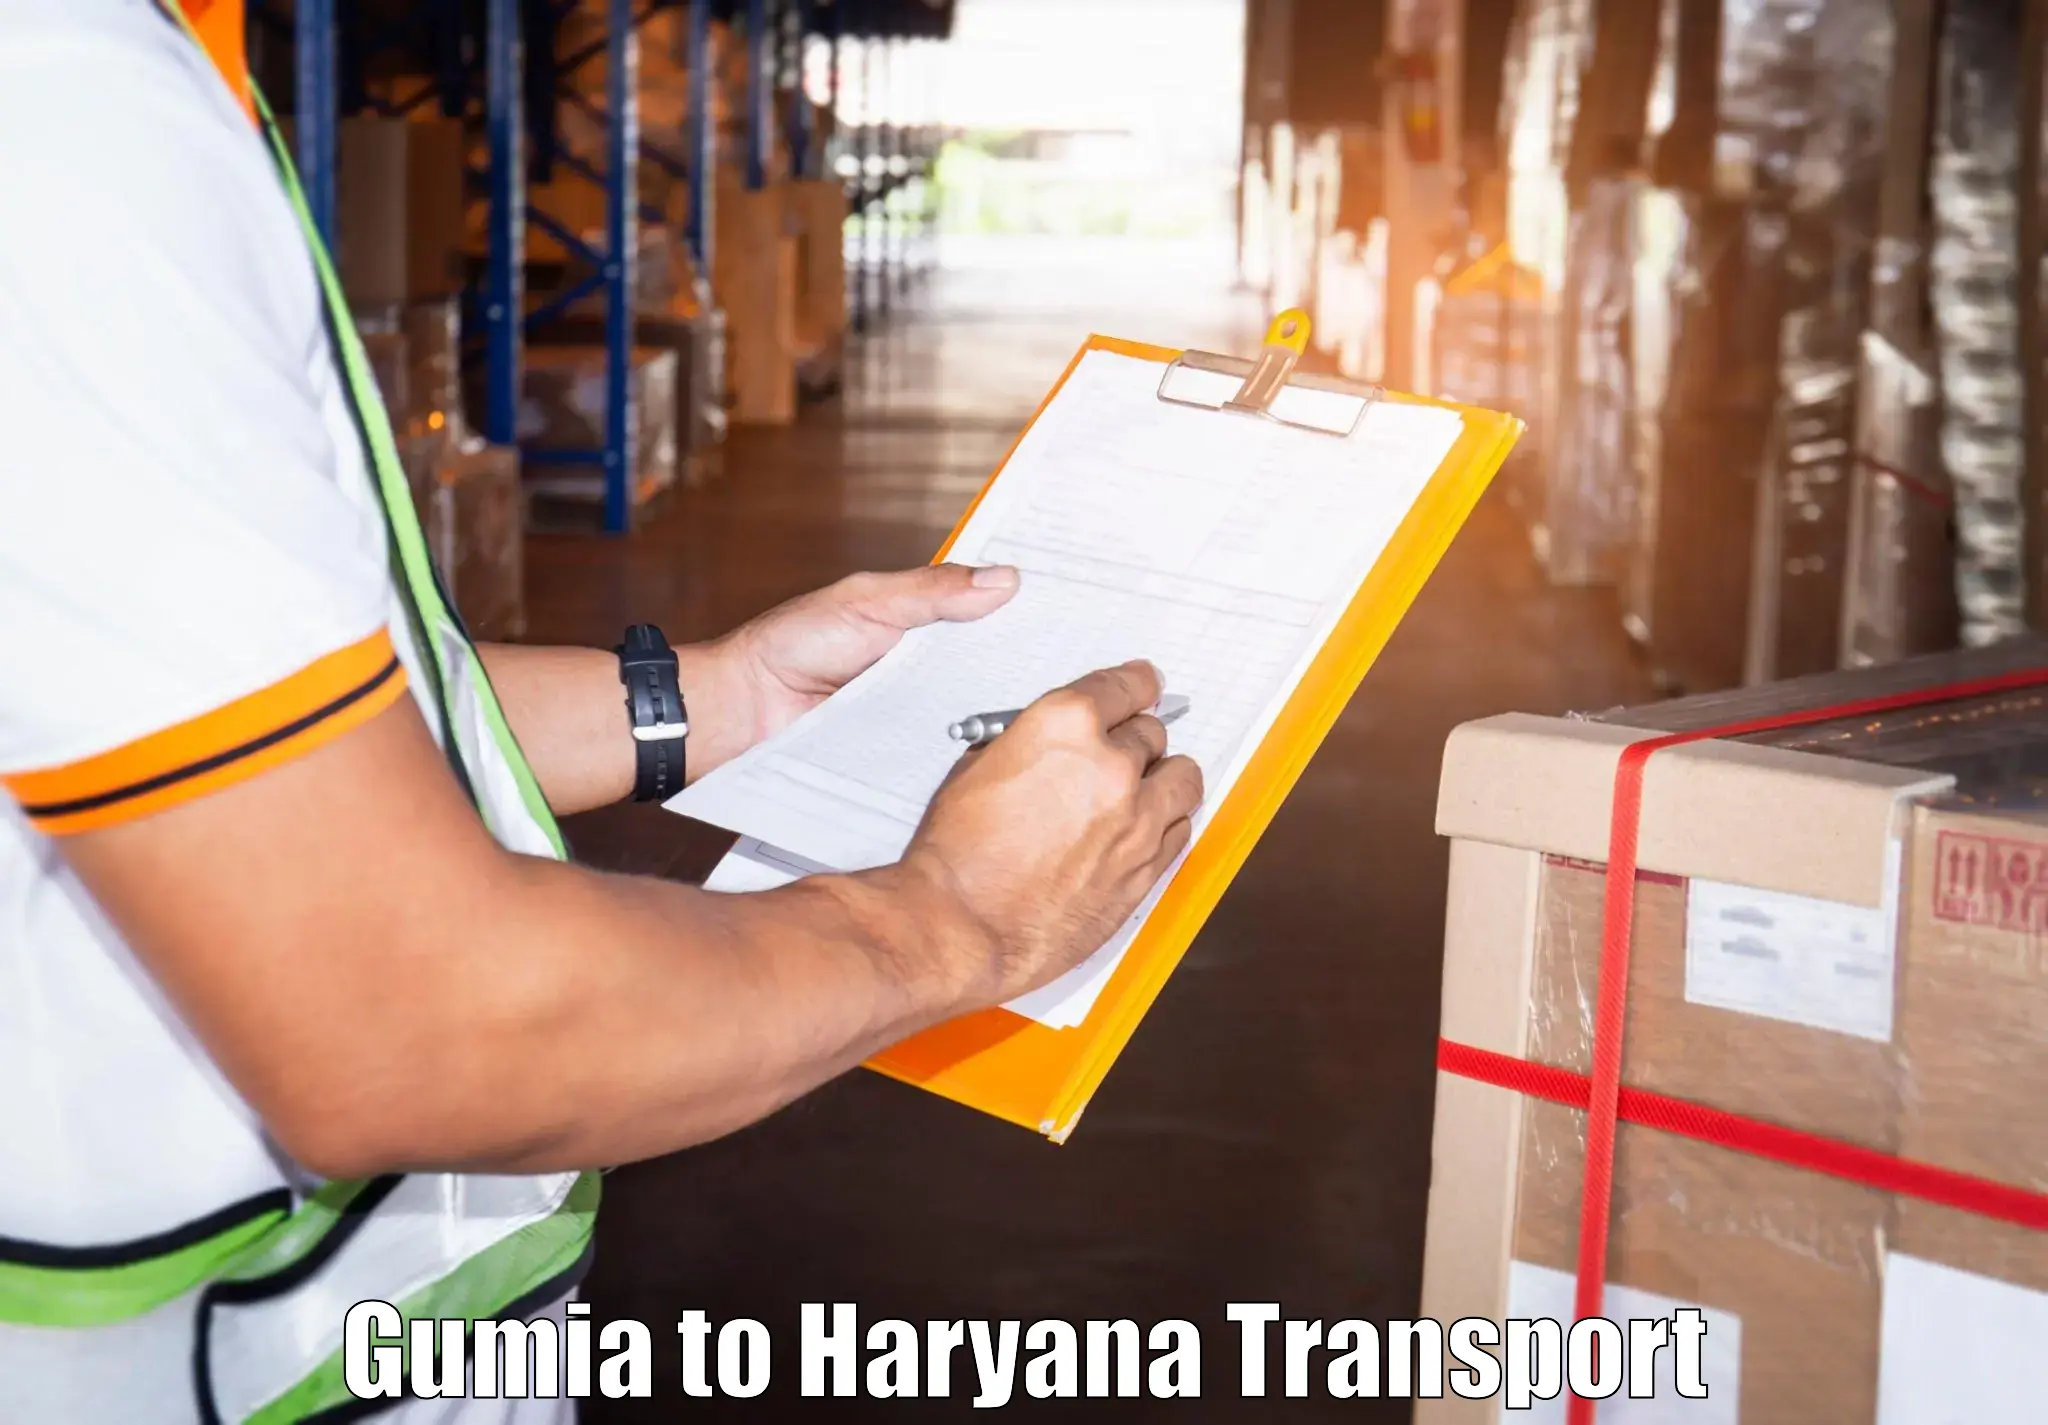 Air cargo transport services Gumia to Chaudhary Charan Singh Haryana Agricultural University Hisar